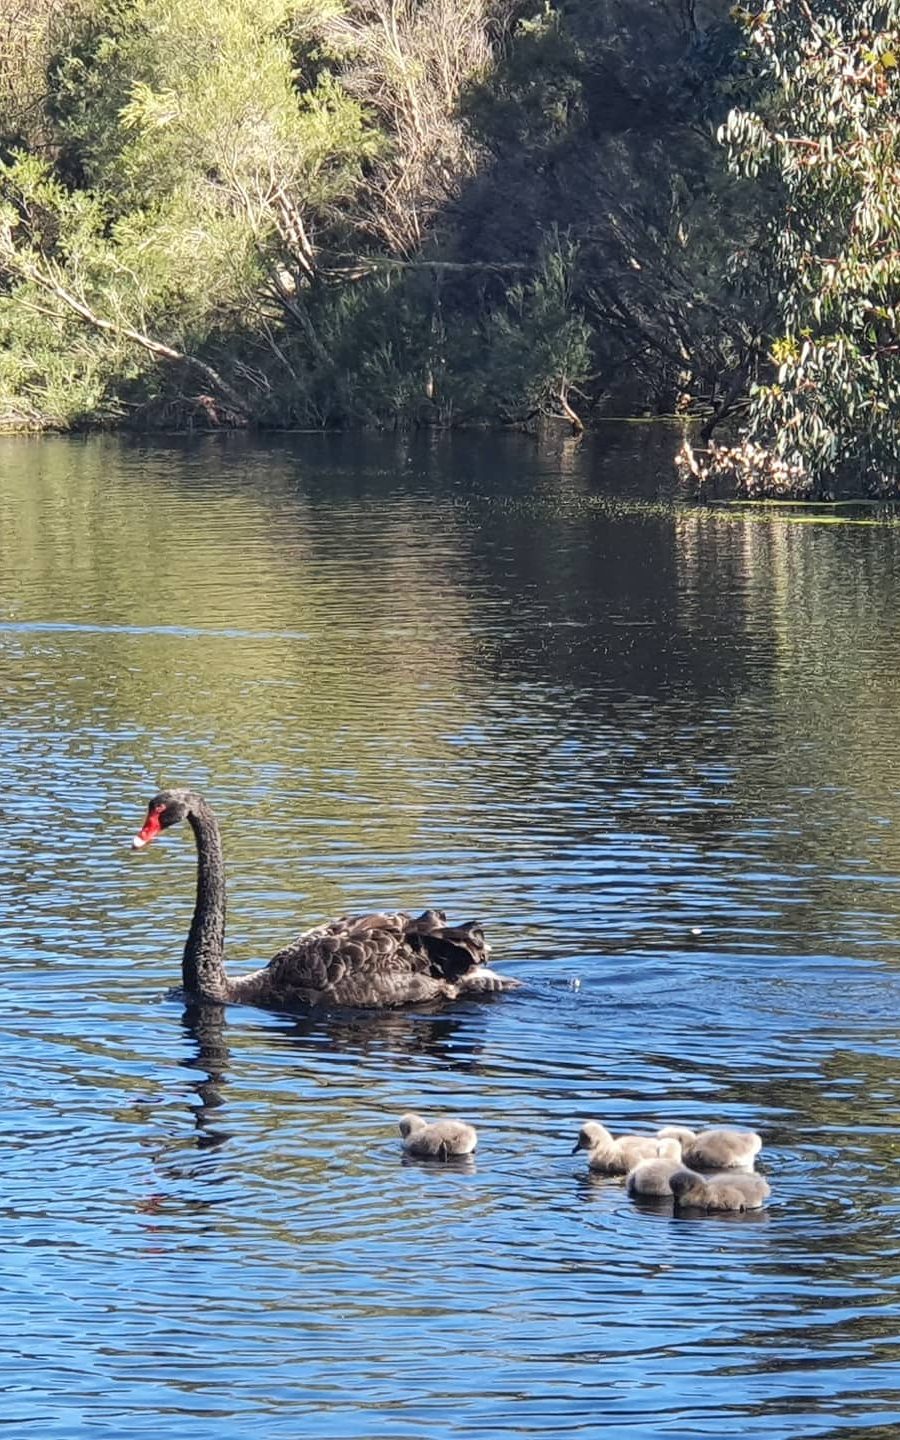 Western Australian black swans and cygnets, swimming in a lake surrounded by bushland. This image represents the way Mental Strides provides mental health training across Western Australia.